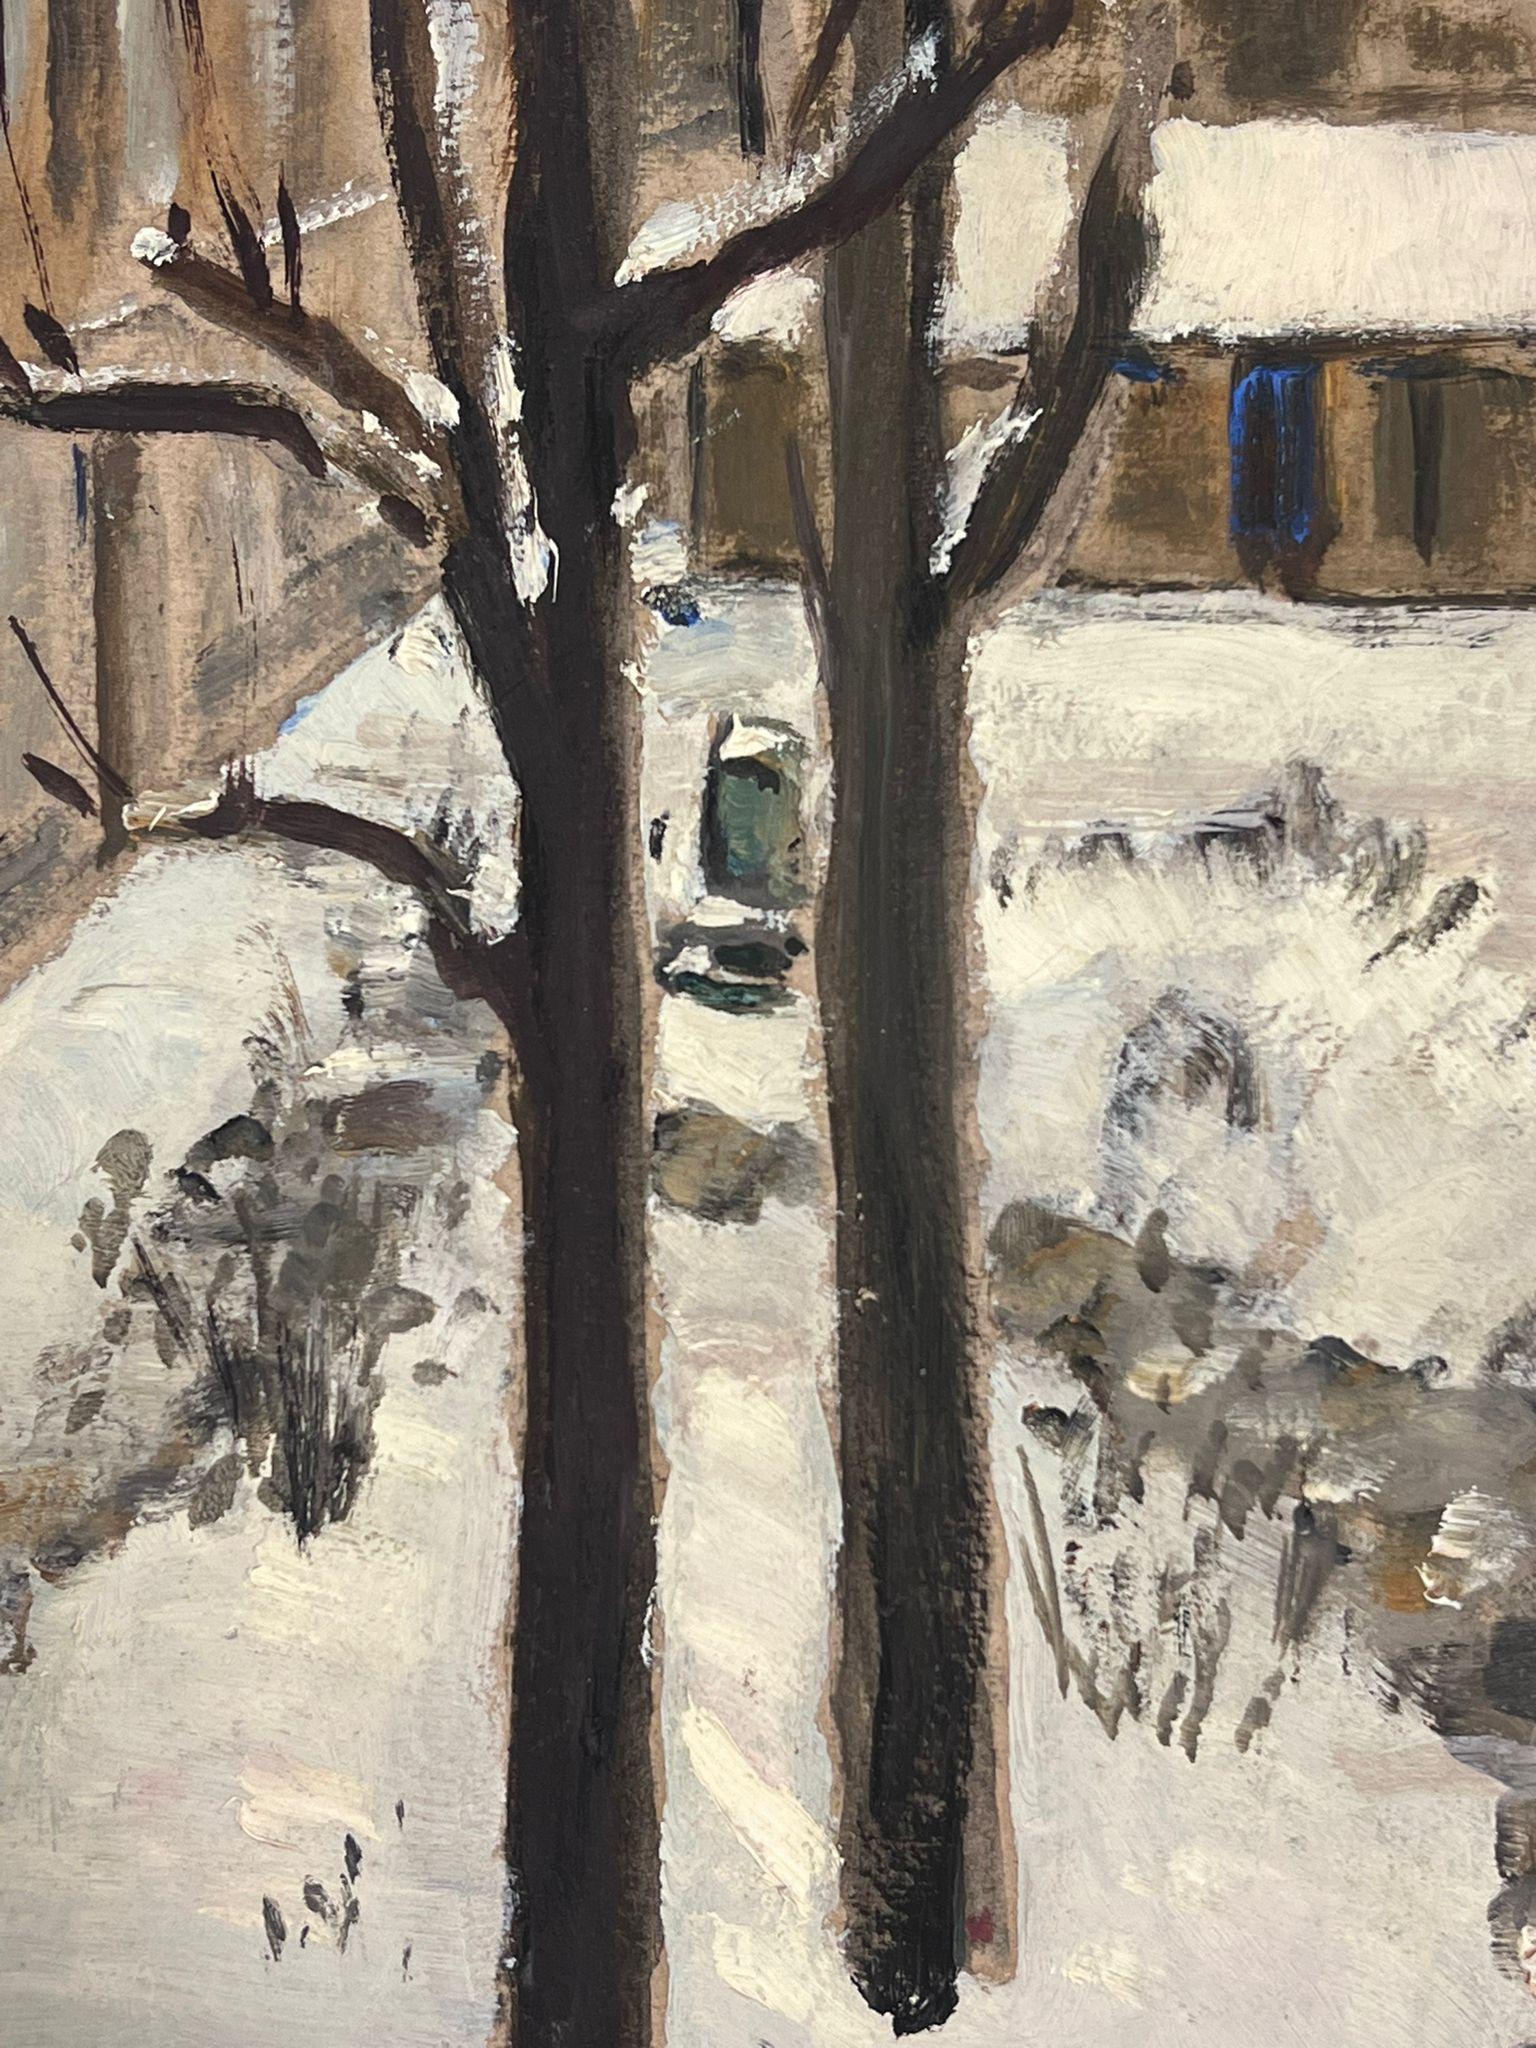 Snowy Trees
by Louise Alix, French 1950's Impressionist 
gouache on board, unframed
painting: 10.75 x 8.25 inches
provenance: from a large private collection of this artists work in Northern France
condition: original, good and sound condition